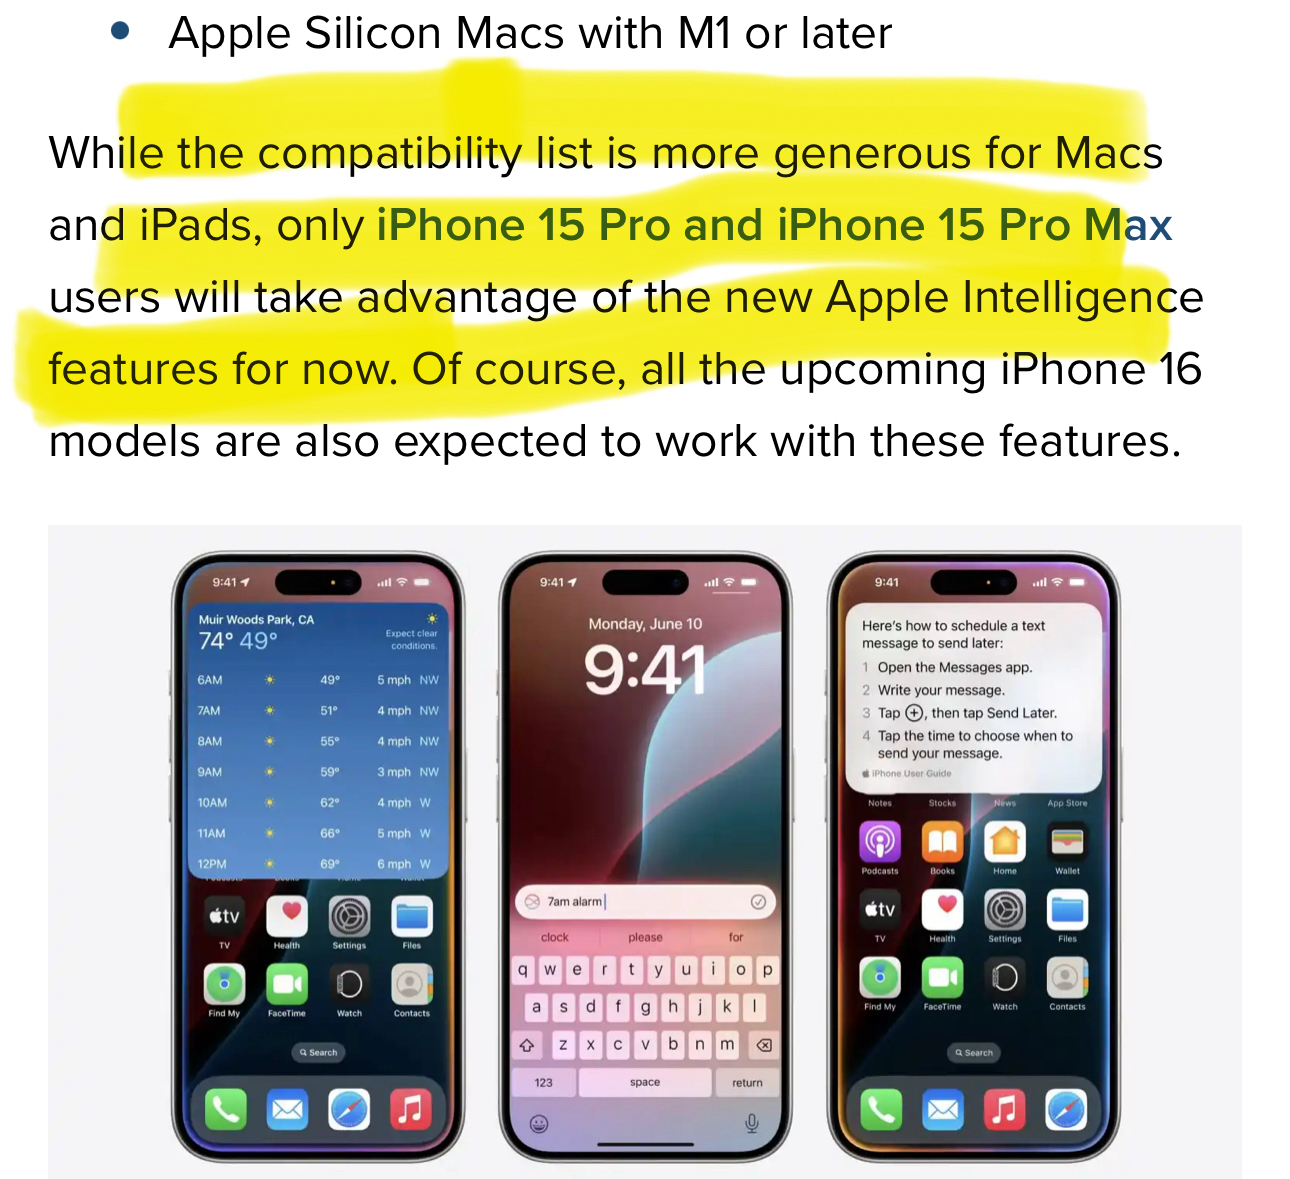 The image shows a compatibility list mentioning that Apple Silicon Macs with M1 or later are compatible. It highlights that only iPhone 15 Pro and iPhone 15 Pro Max users can currently take advantage of new Apple Intelligence features, with upcoming iPhone